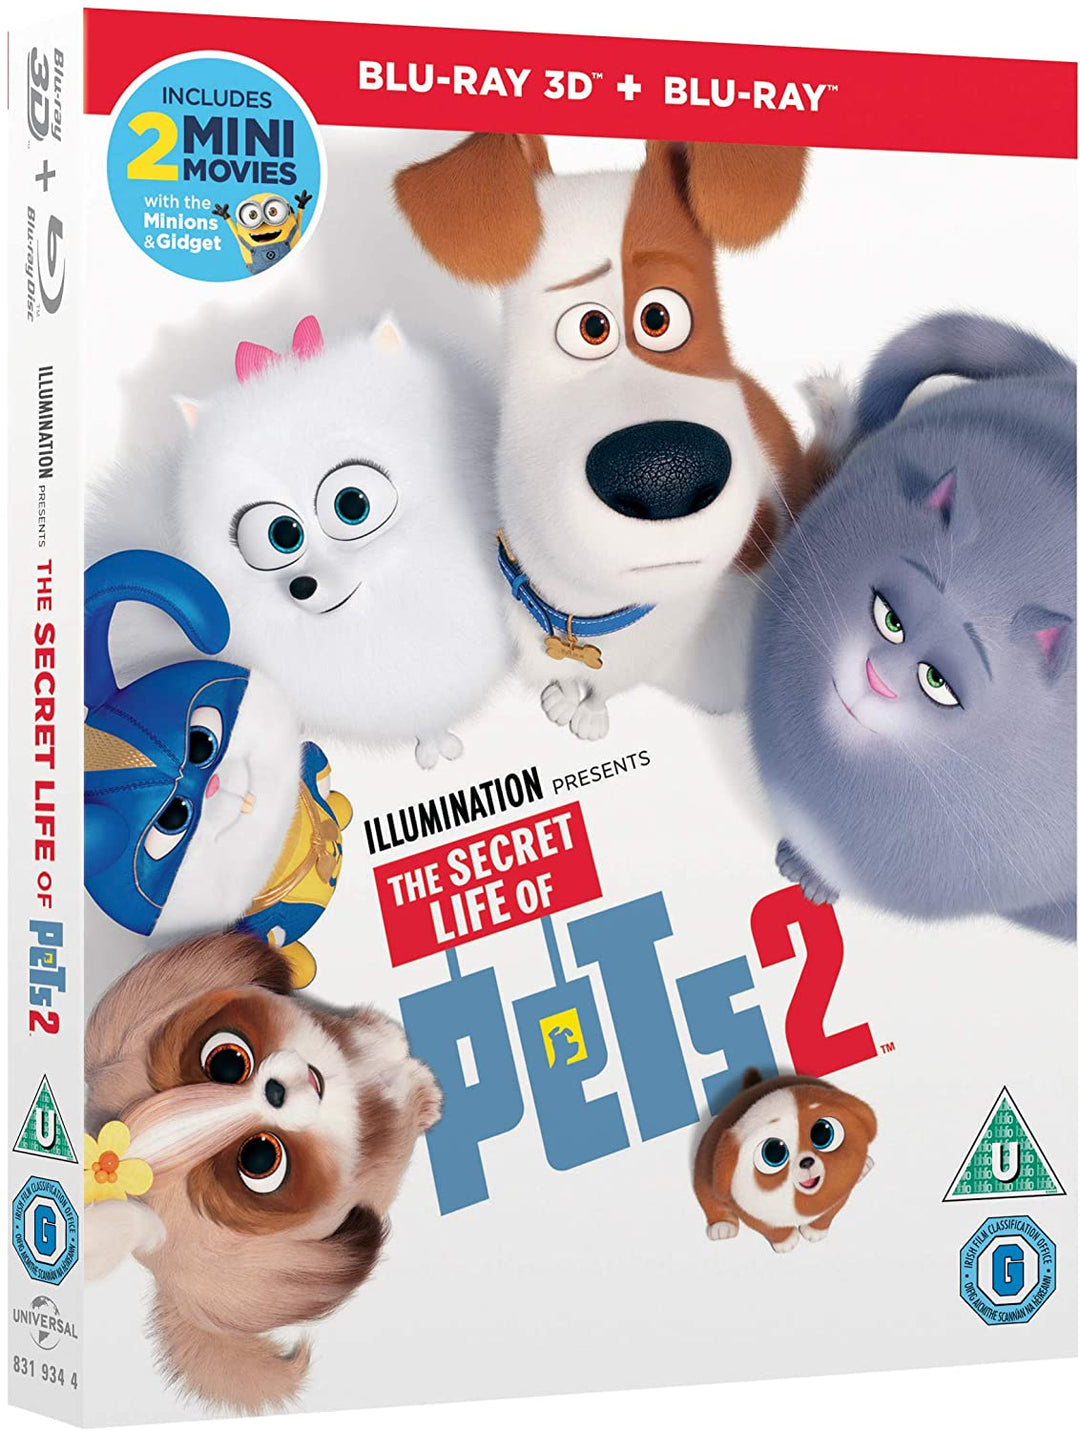 The Secret Life of Pets 2 - Family/Comedy [Blu-Ray]